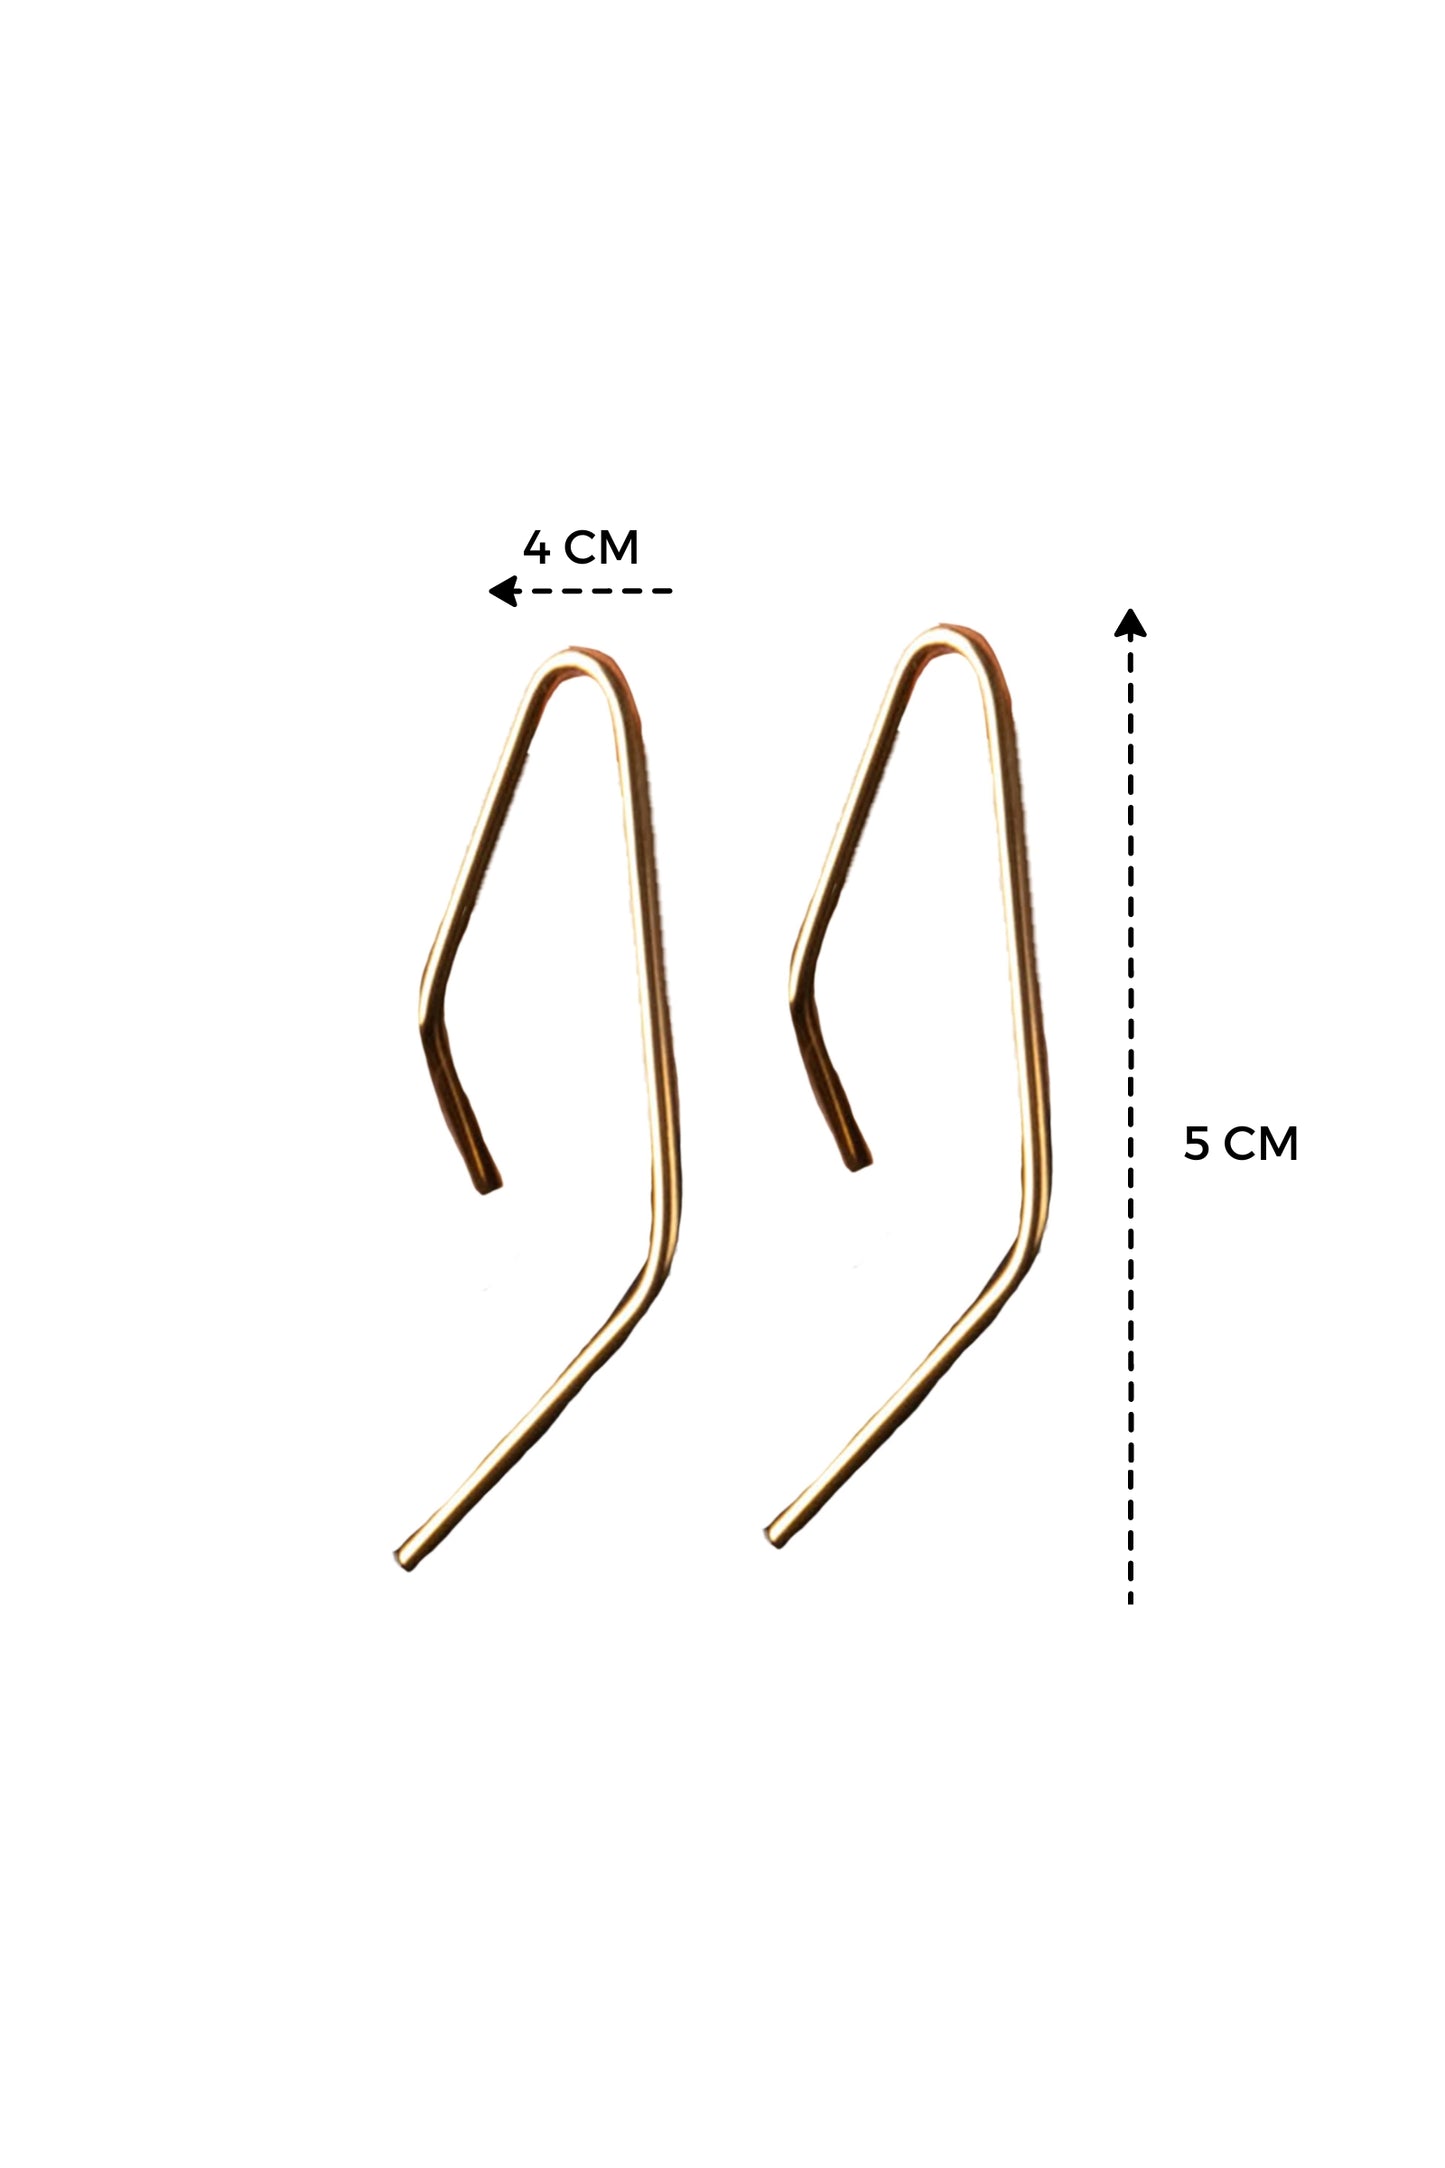 a pair of gold earrings with a length guide